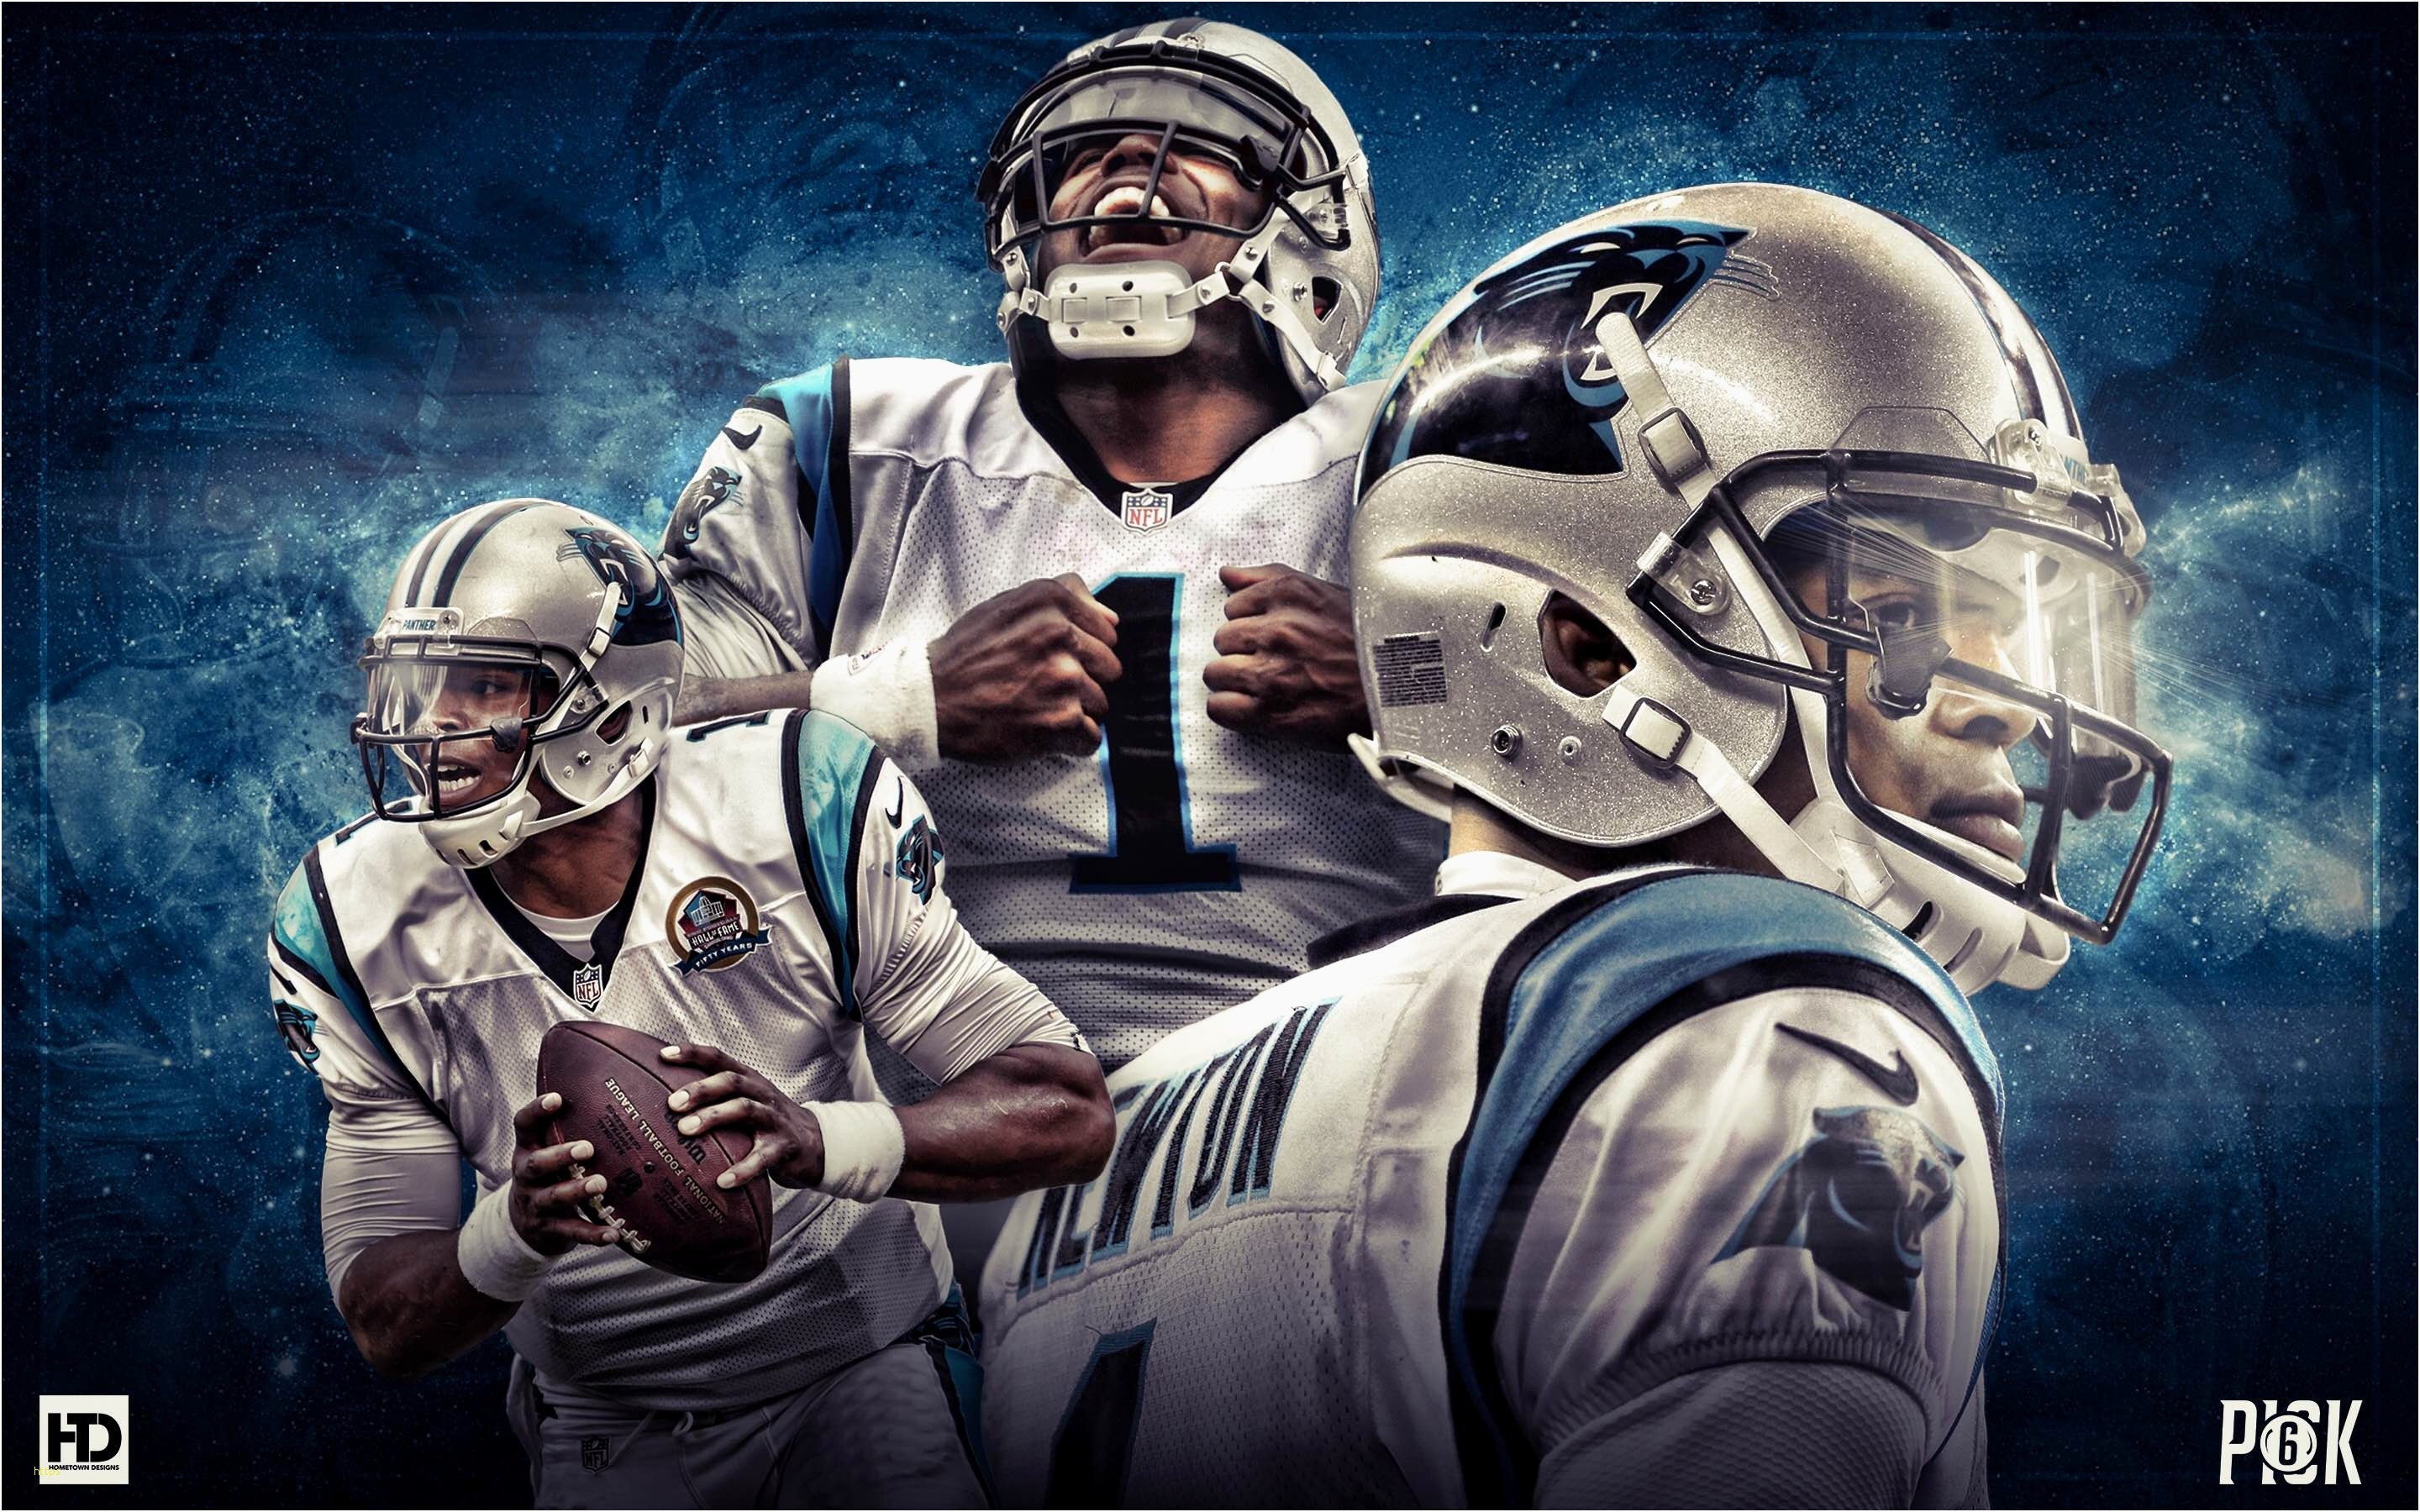 2880x1800 ... Cam Newton Wallpaper Awesome Cam Newton Wallpapers Hd Collection For  Free Download ...